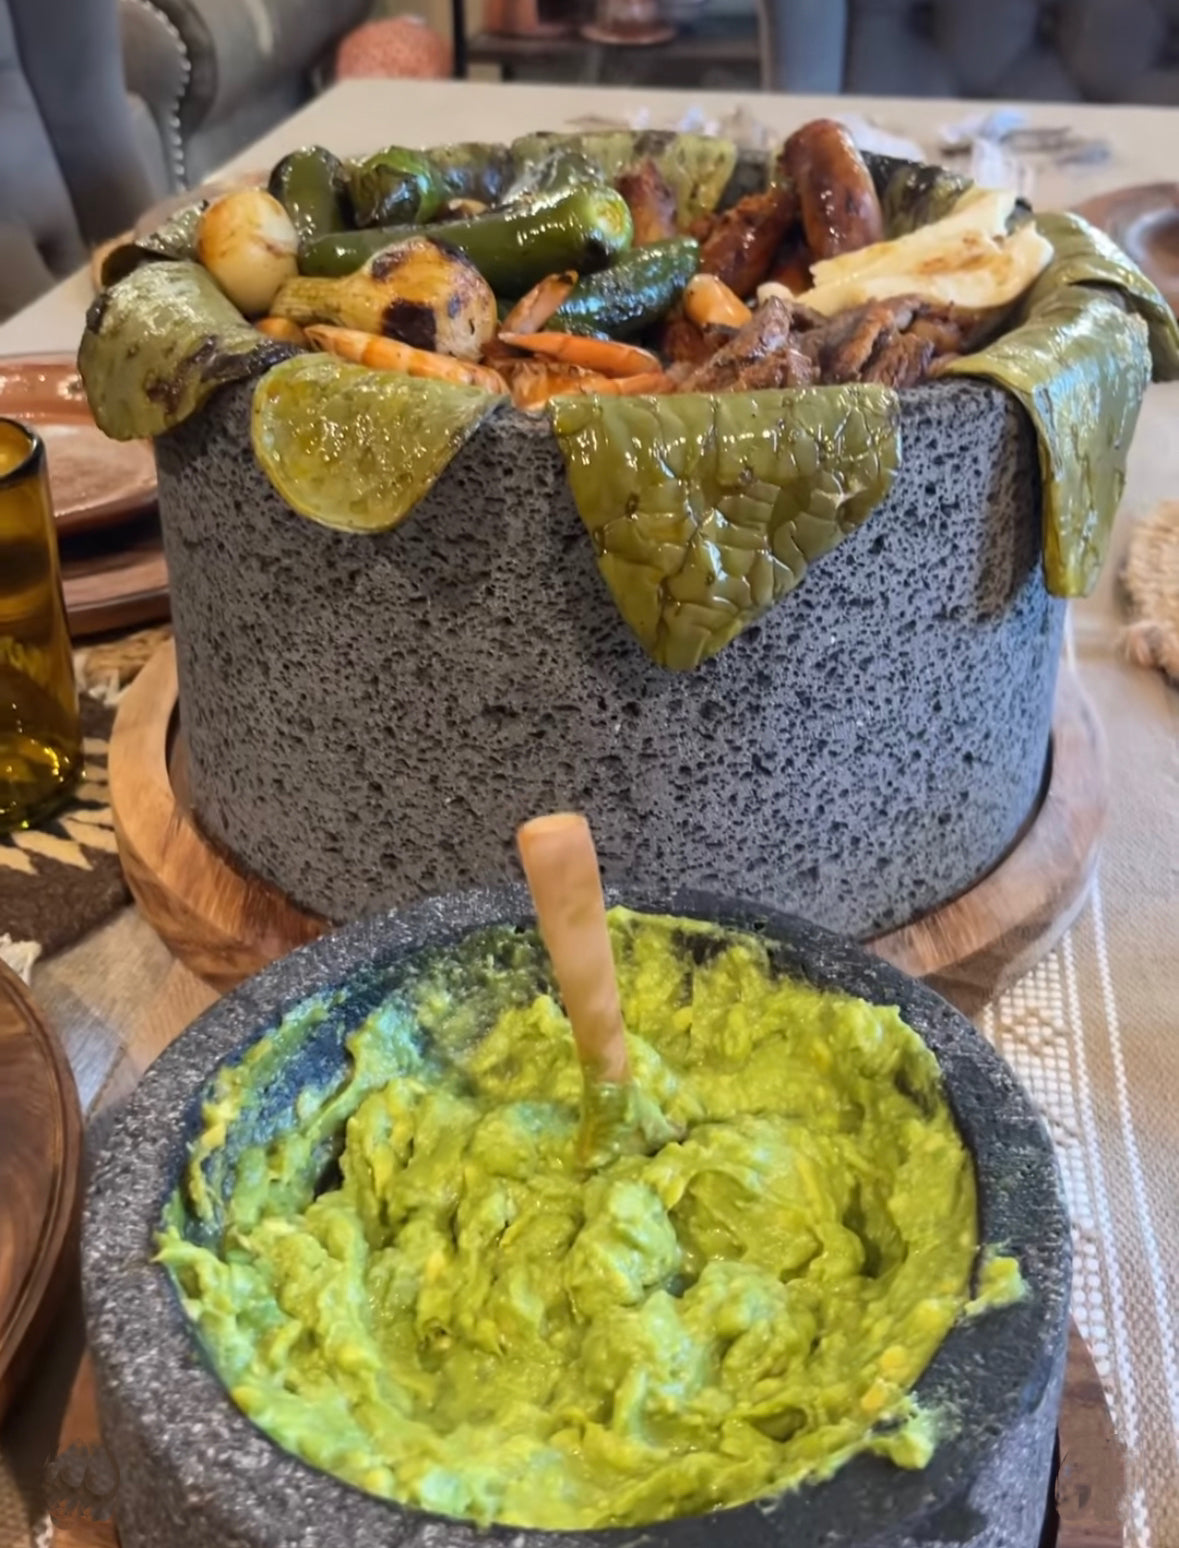 Find out the story of the molcajete